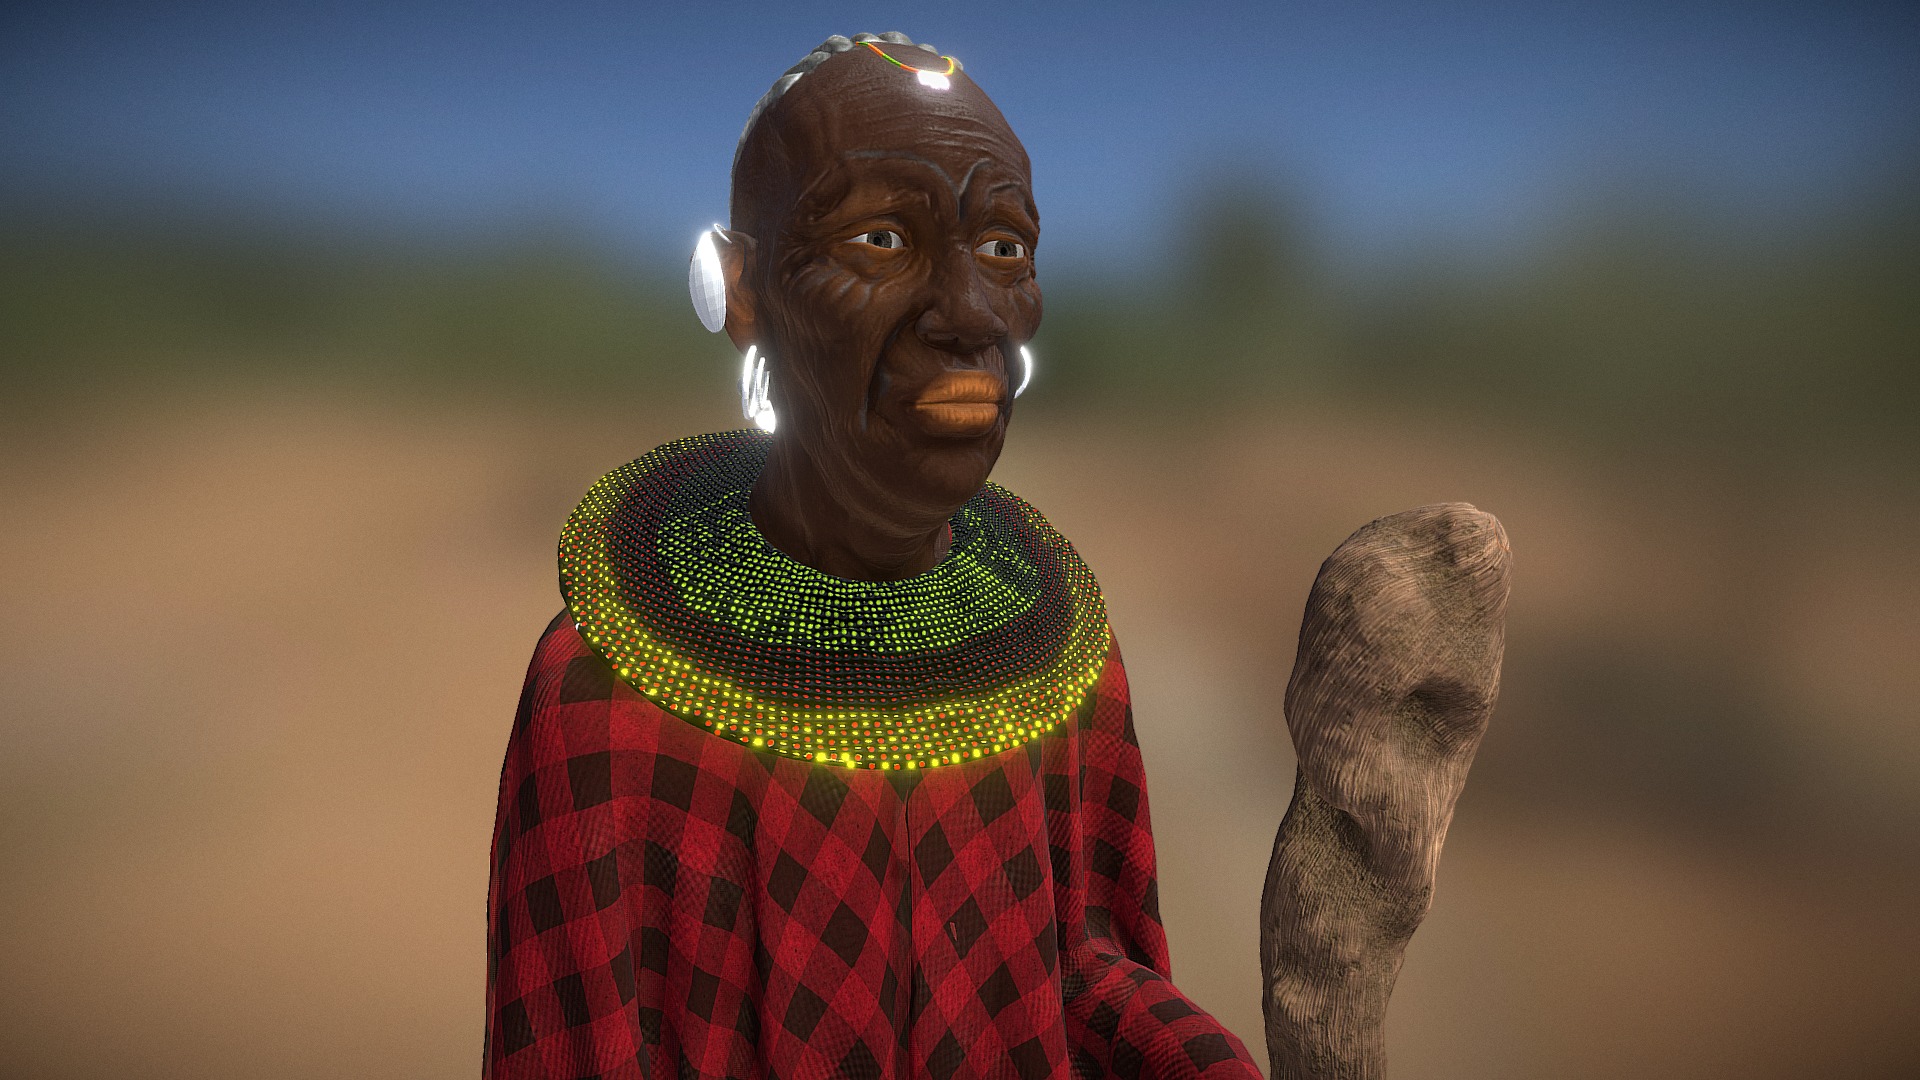 3D model Tribe Turkana - This is a 3D model of the Tribe Turkana. The 3D model is about a man wearing a garment.